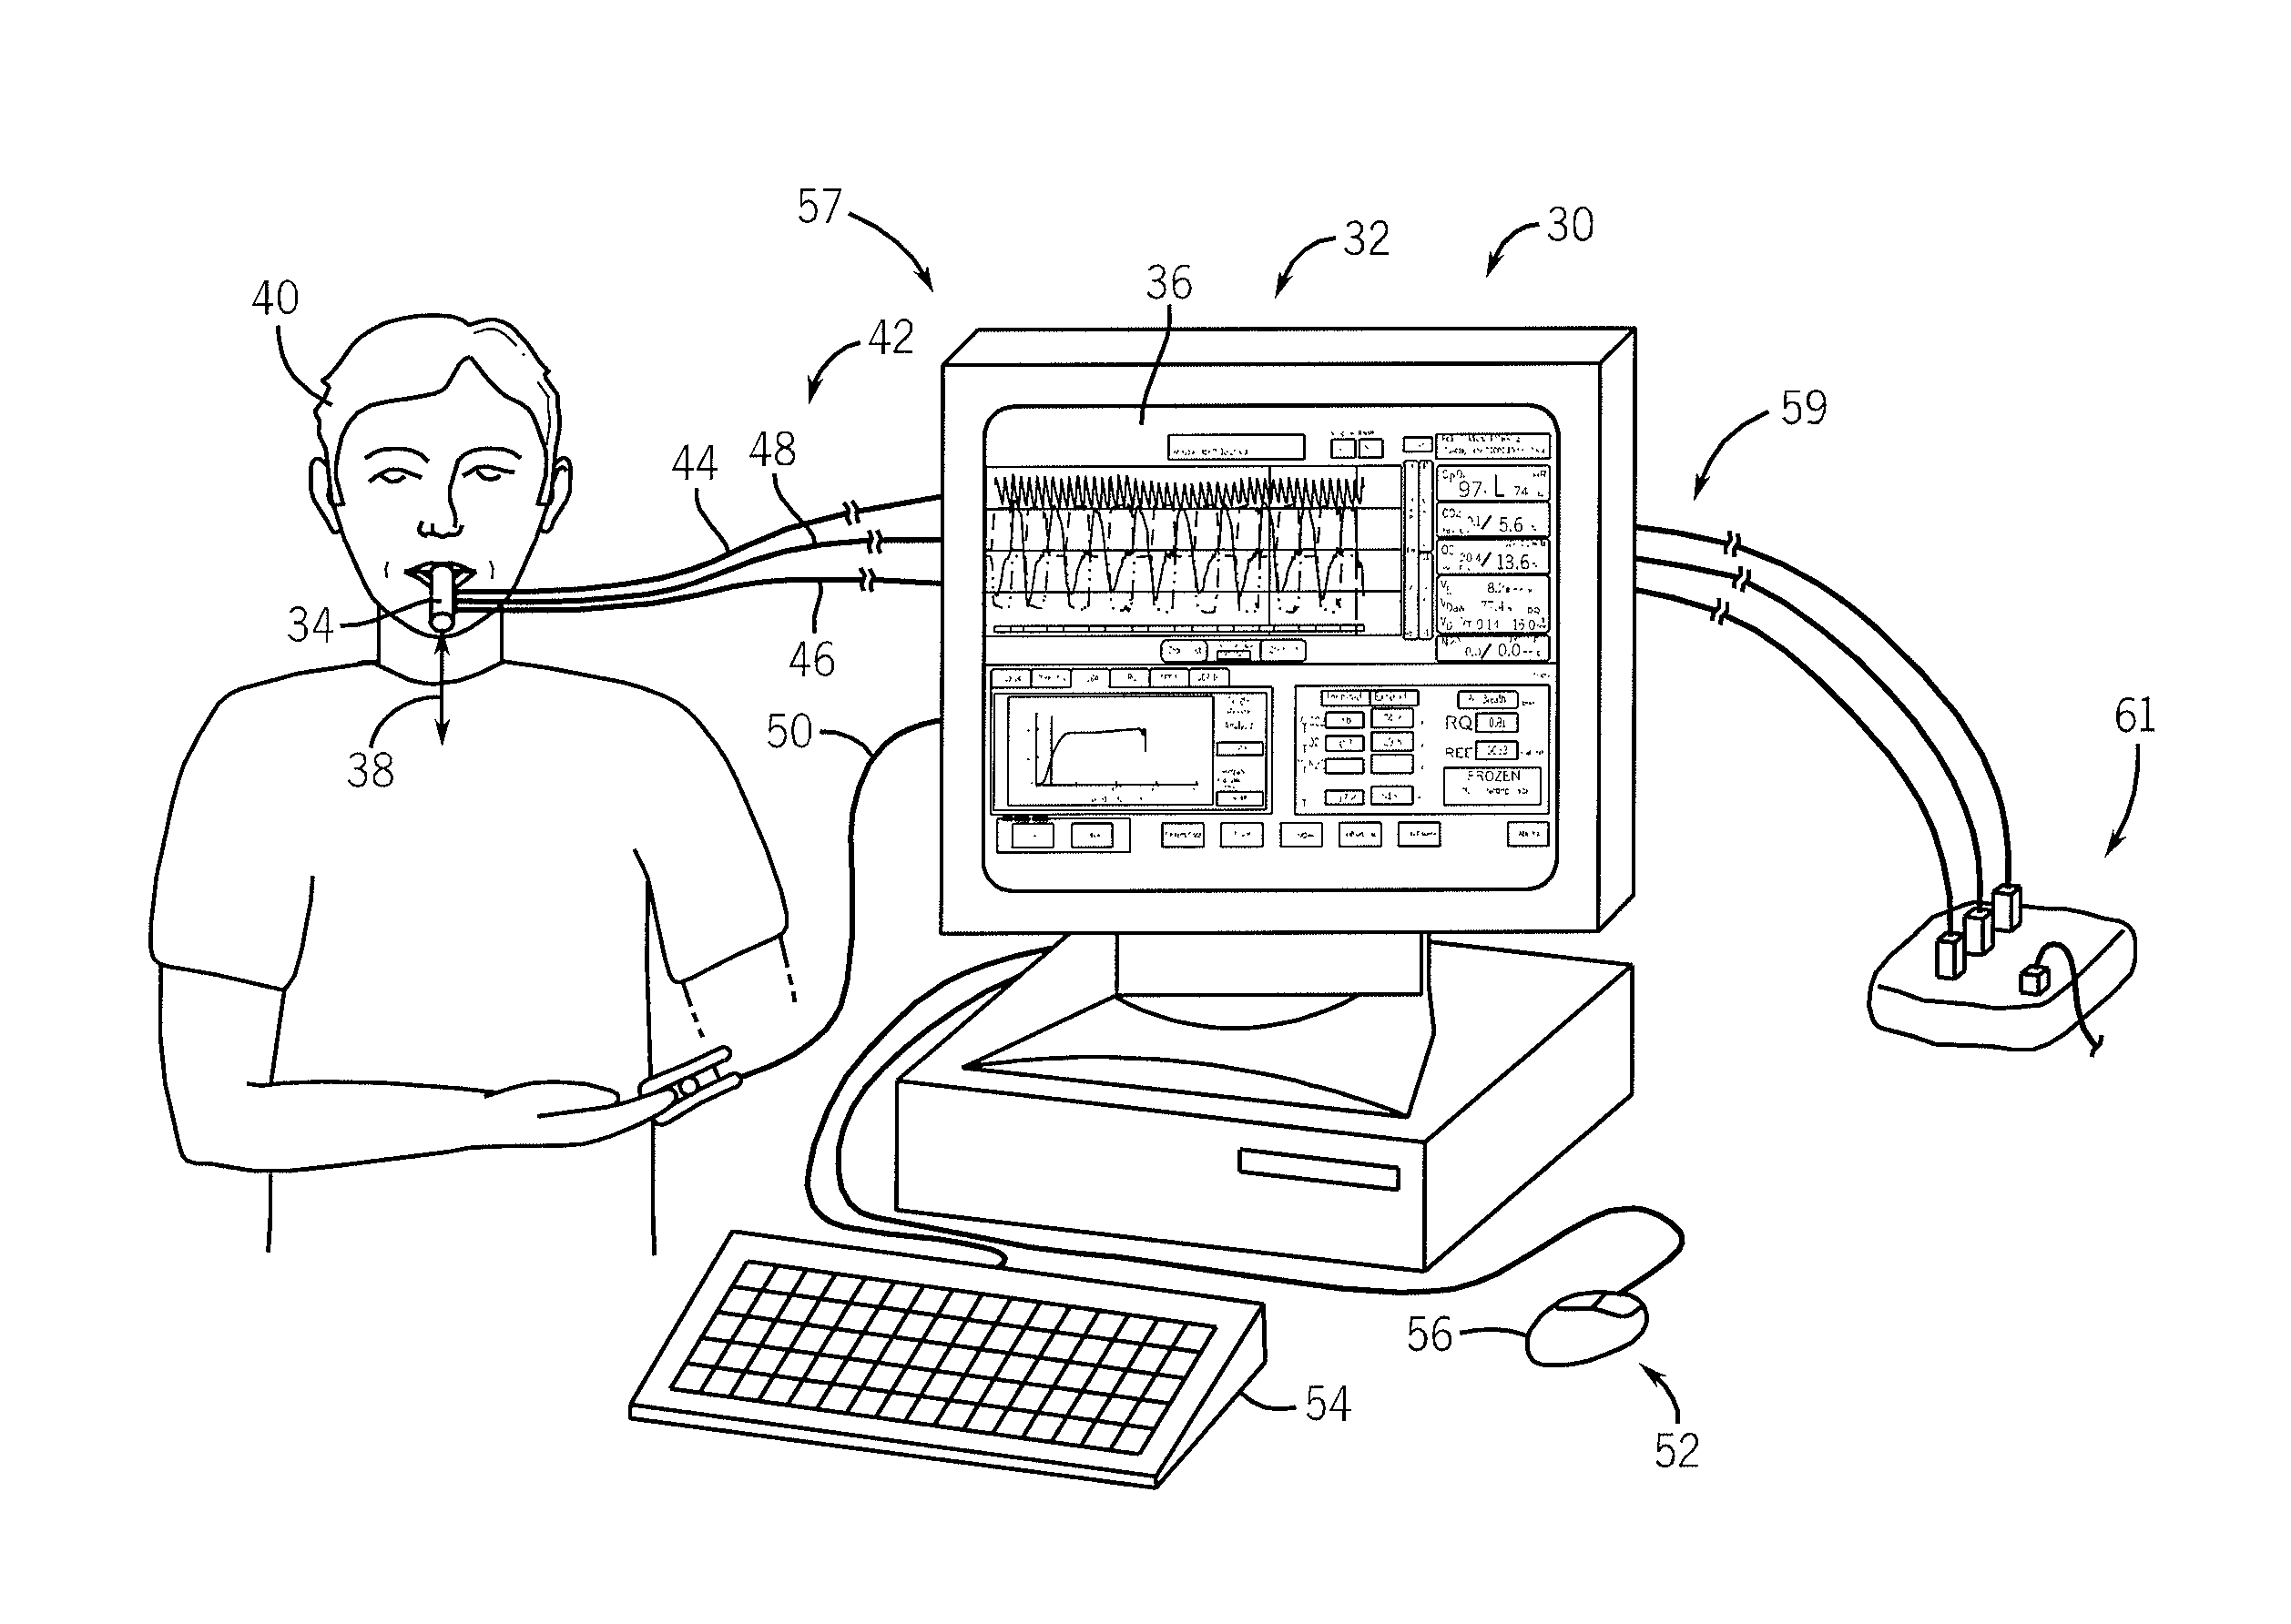 Side-stream respiratory gas monitoring system and method